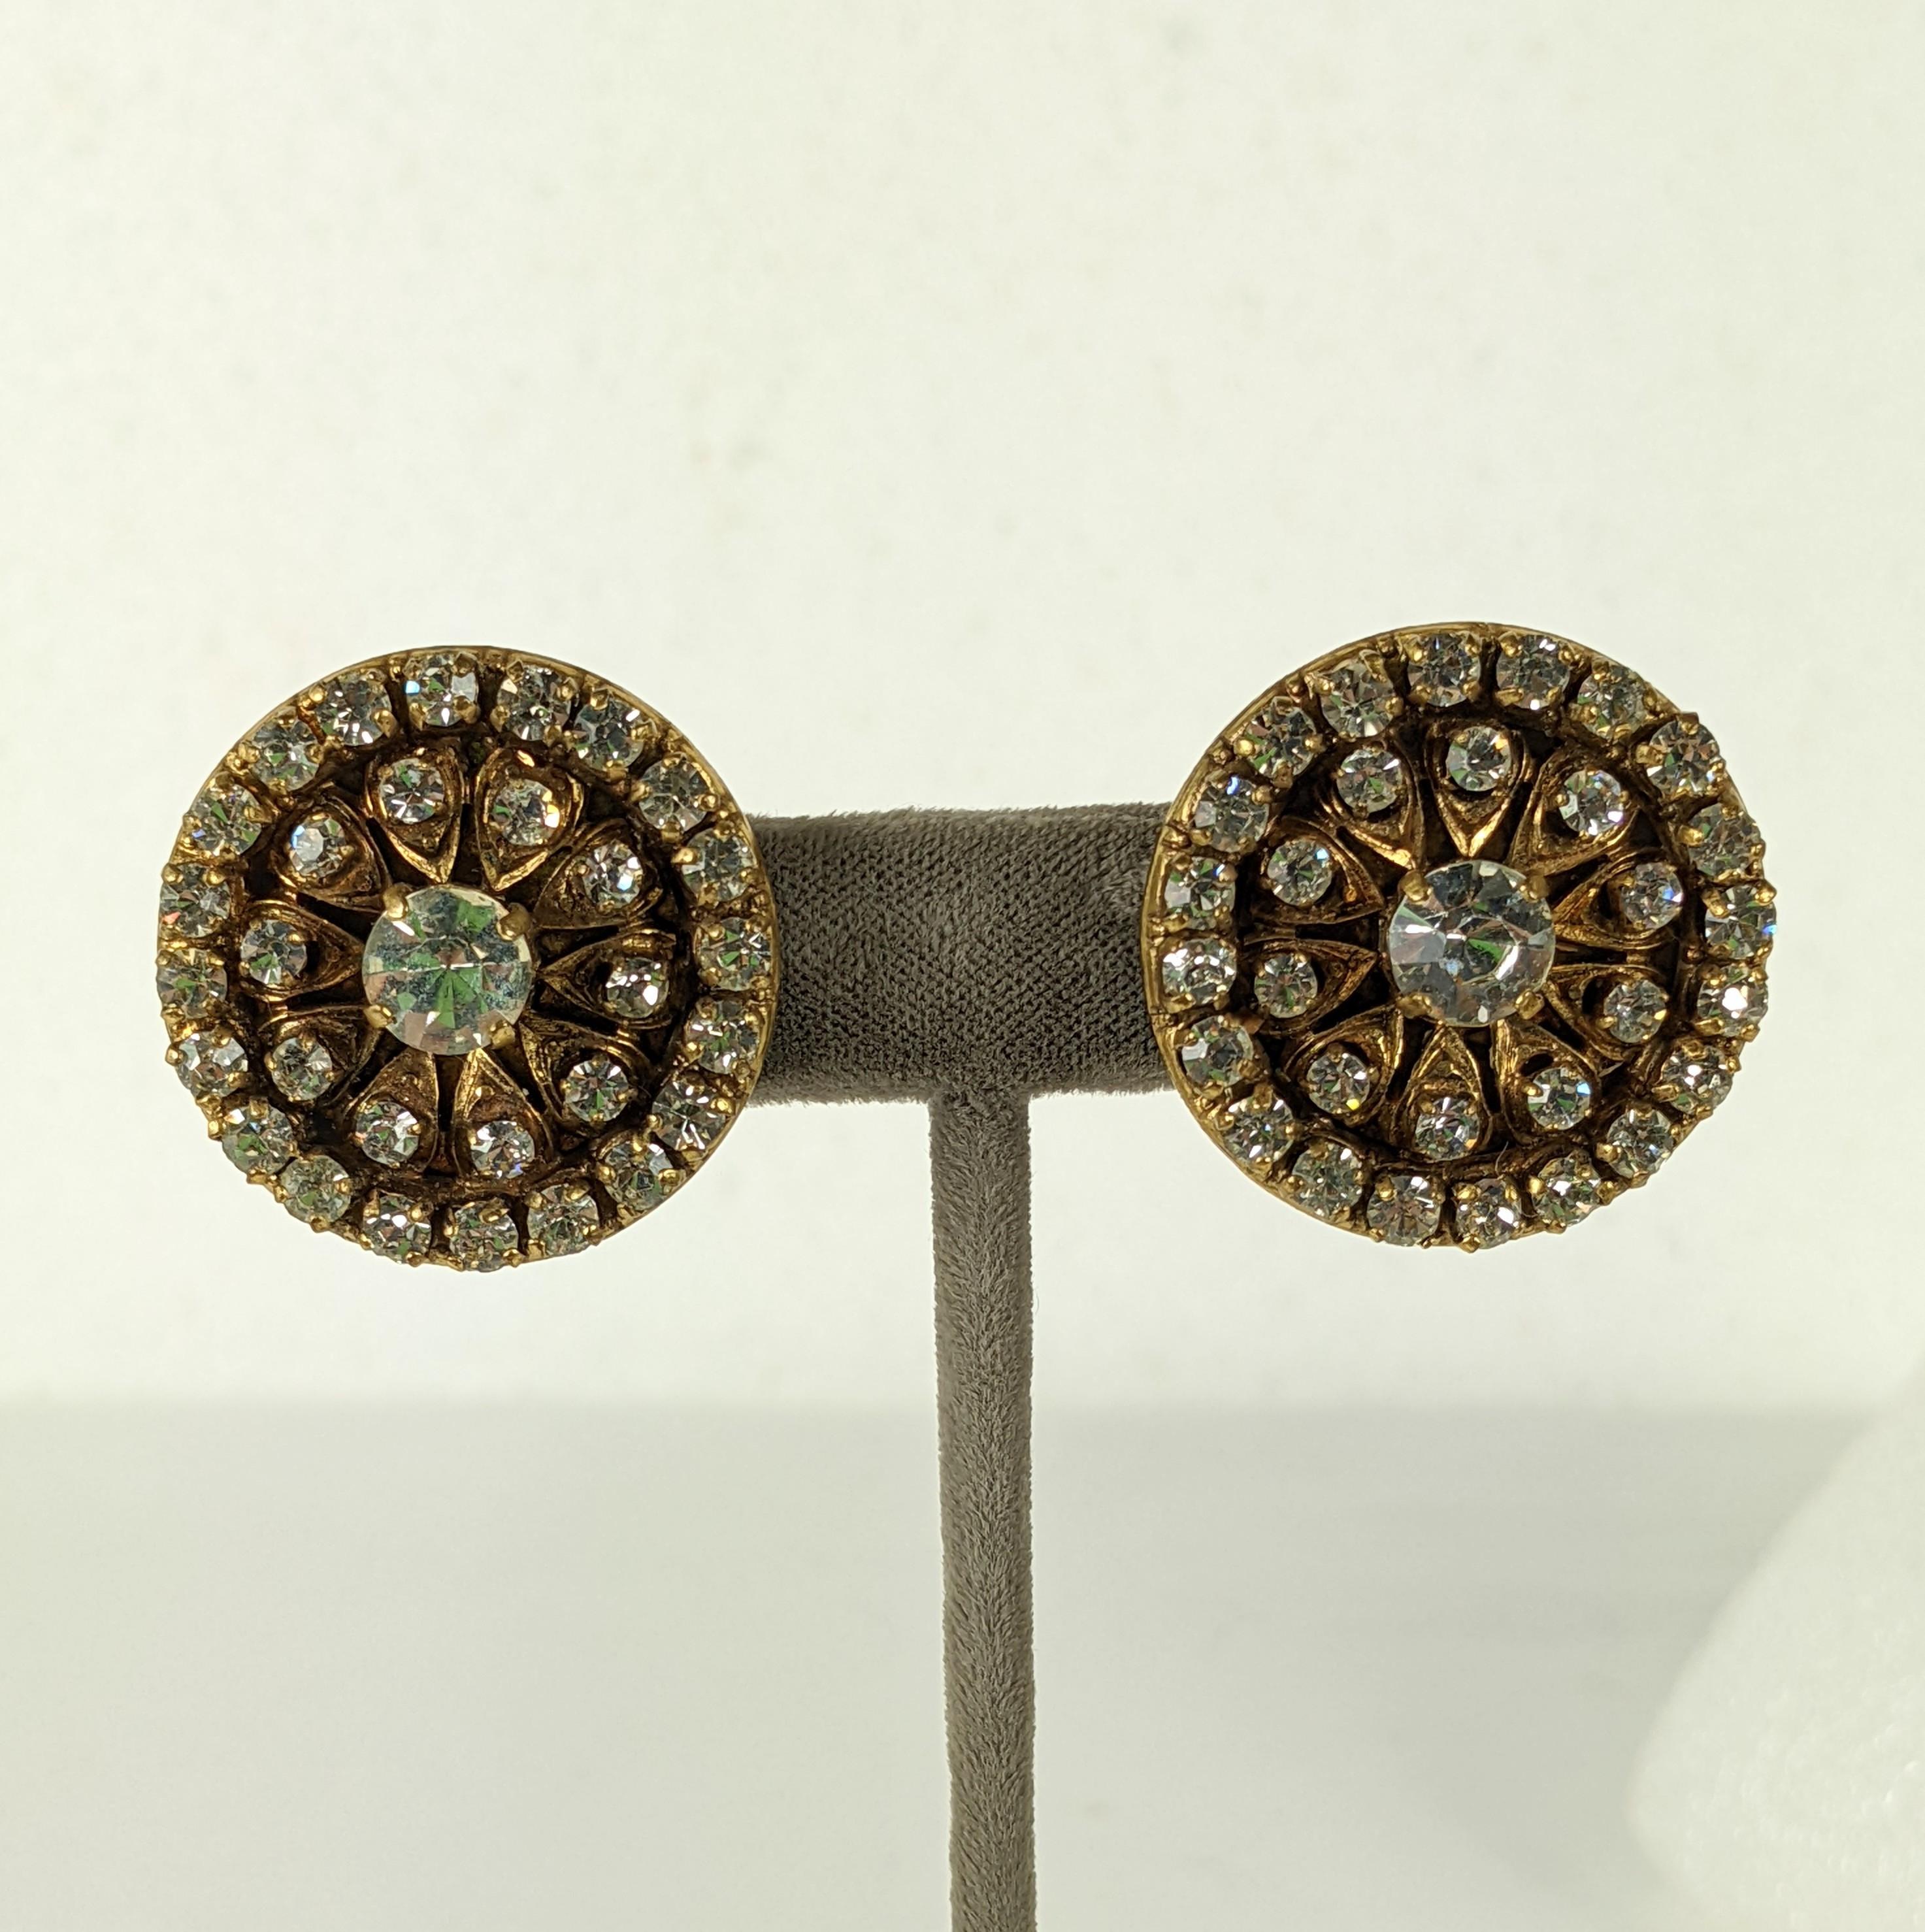 Chanel Pave Encrusted Earrings from the 1990's. Vari sized Swarovski crystals are set in on a round filigree backing in antiqued gold bronze. Clip back fittings.  1.25